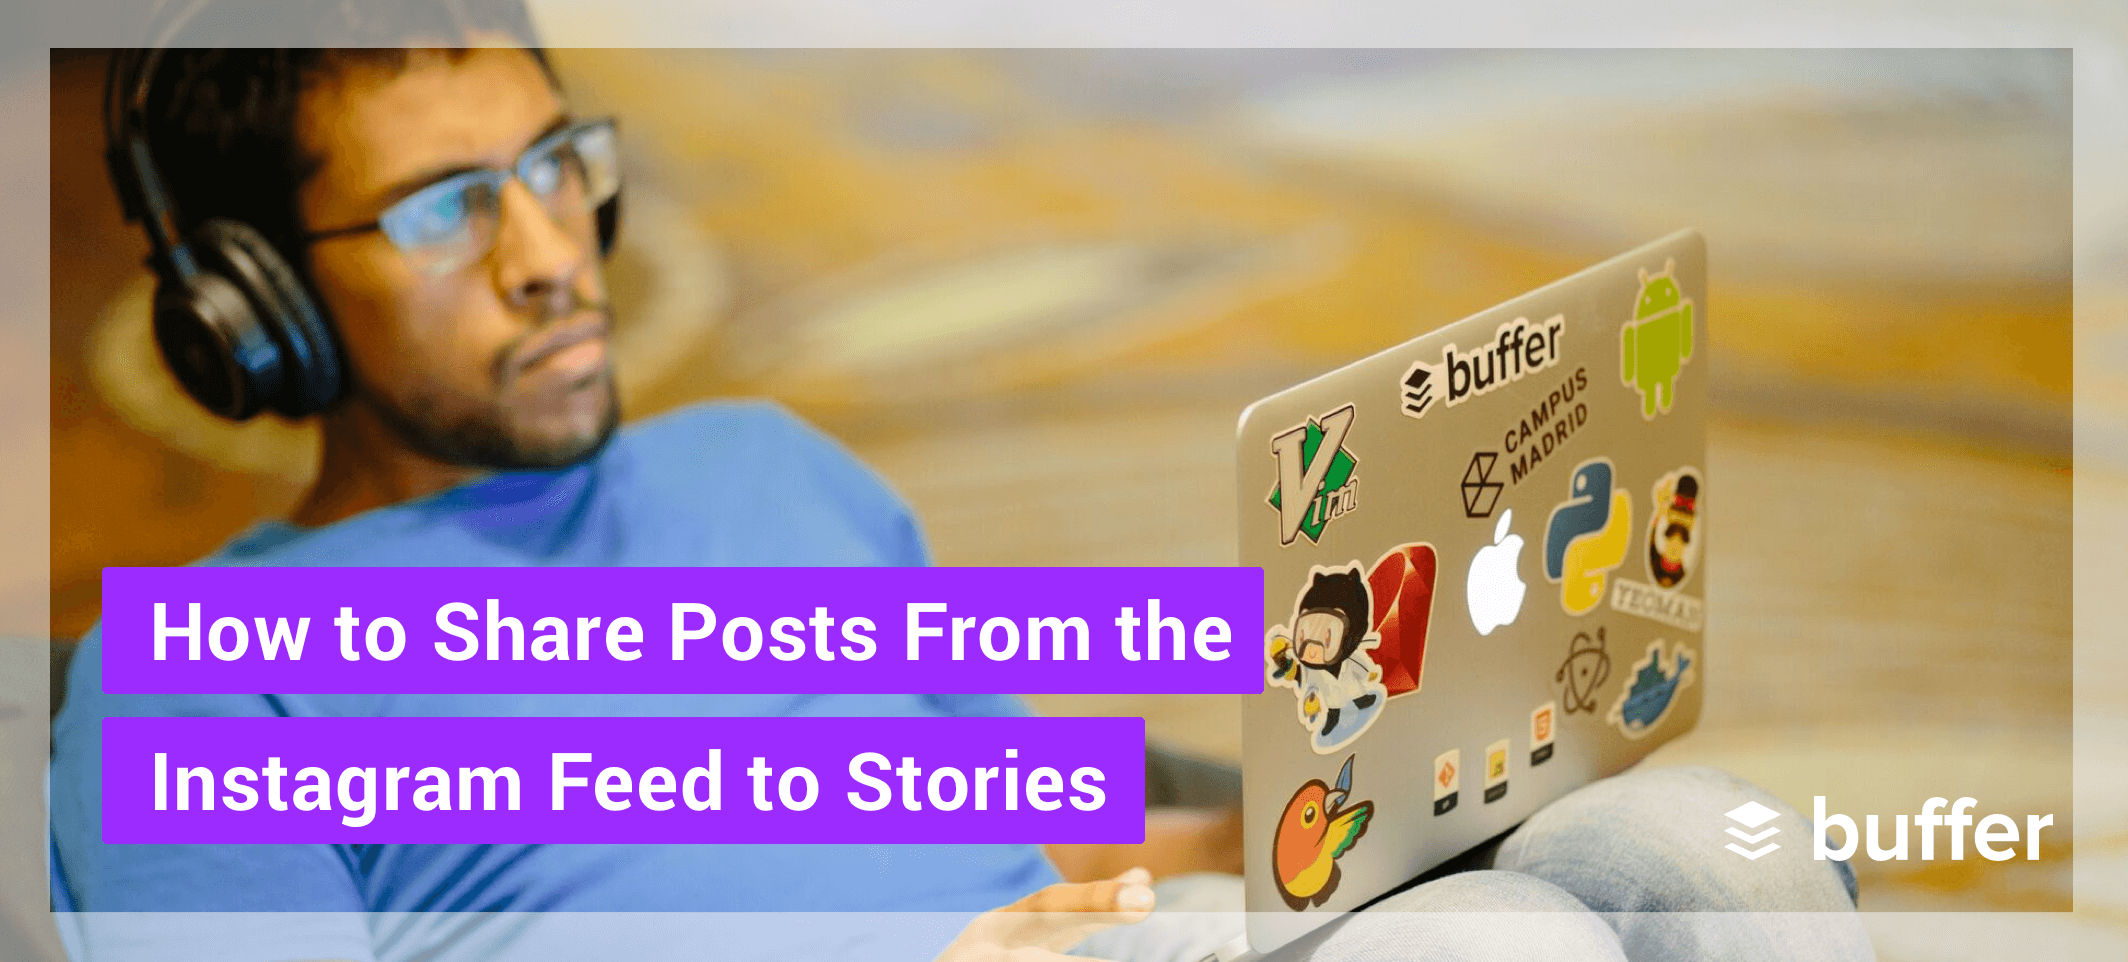 How to Share Posts From the Instagram Feed to Stories -